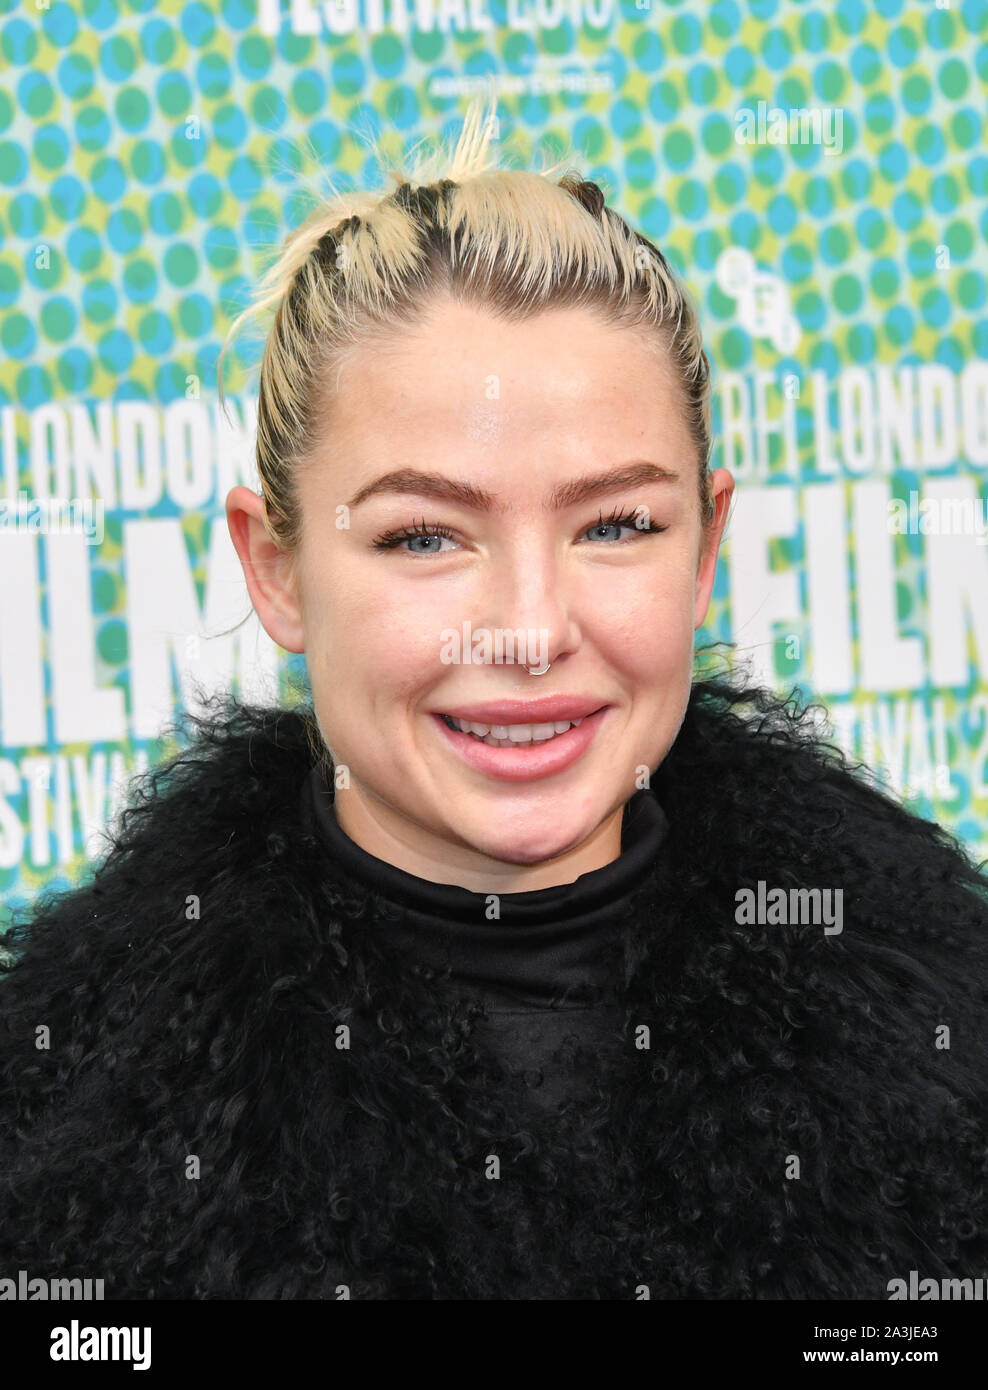 London, UK. 8th Oct 2019. Jessica Anne Woodley attends Portrait of a Lady on Fire premiere, an 18th century drama about a female painter who falls in love with her subject, at Embankment Gardens Cinema  London, UK - 8 October 2019 Credit: Nils Jorgensen/Alamy Live News Stock Photo